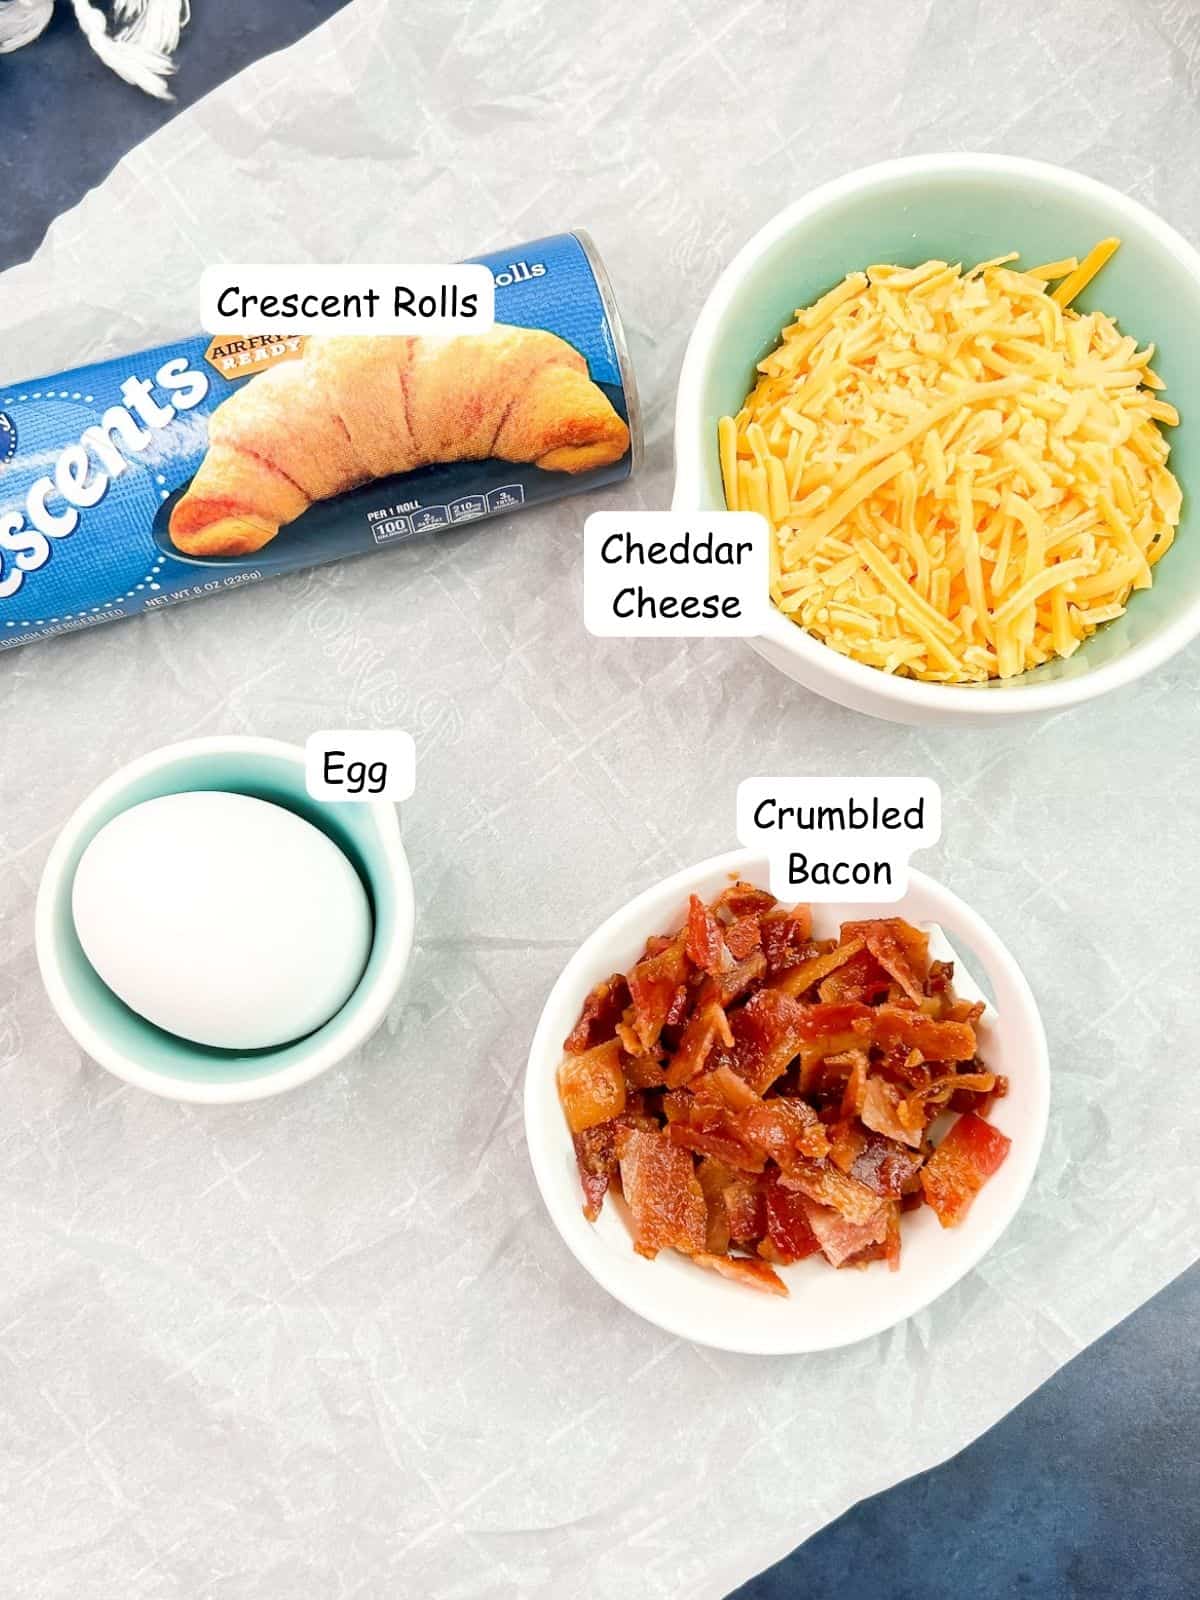 ingredients crescent rolls, crumbled bacon, cheddar cheese and egg.